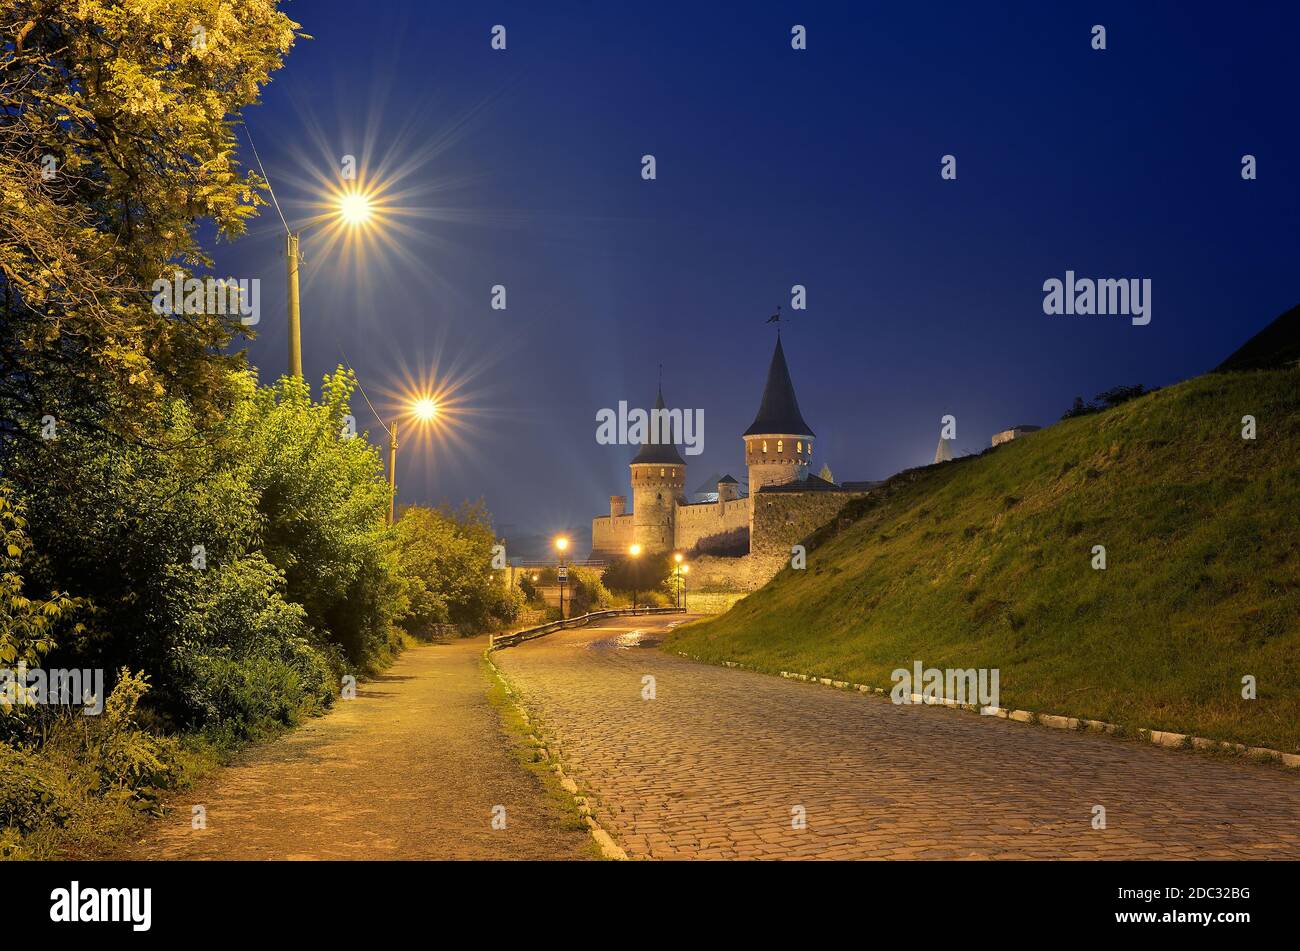 Night landscape with a road leading to the old fortress. Lamplight in the street. Historic Landmark. Old town of Kamenetz-Podolsk, Ukraine, Europe Stock Photo